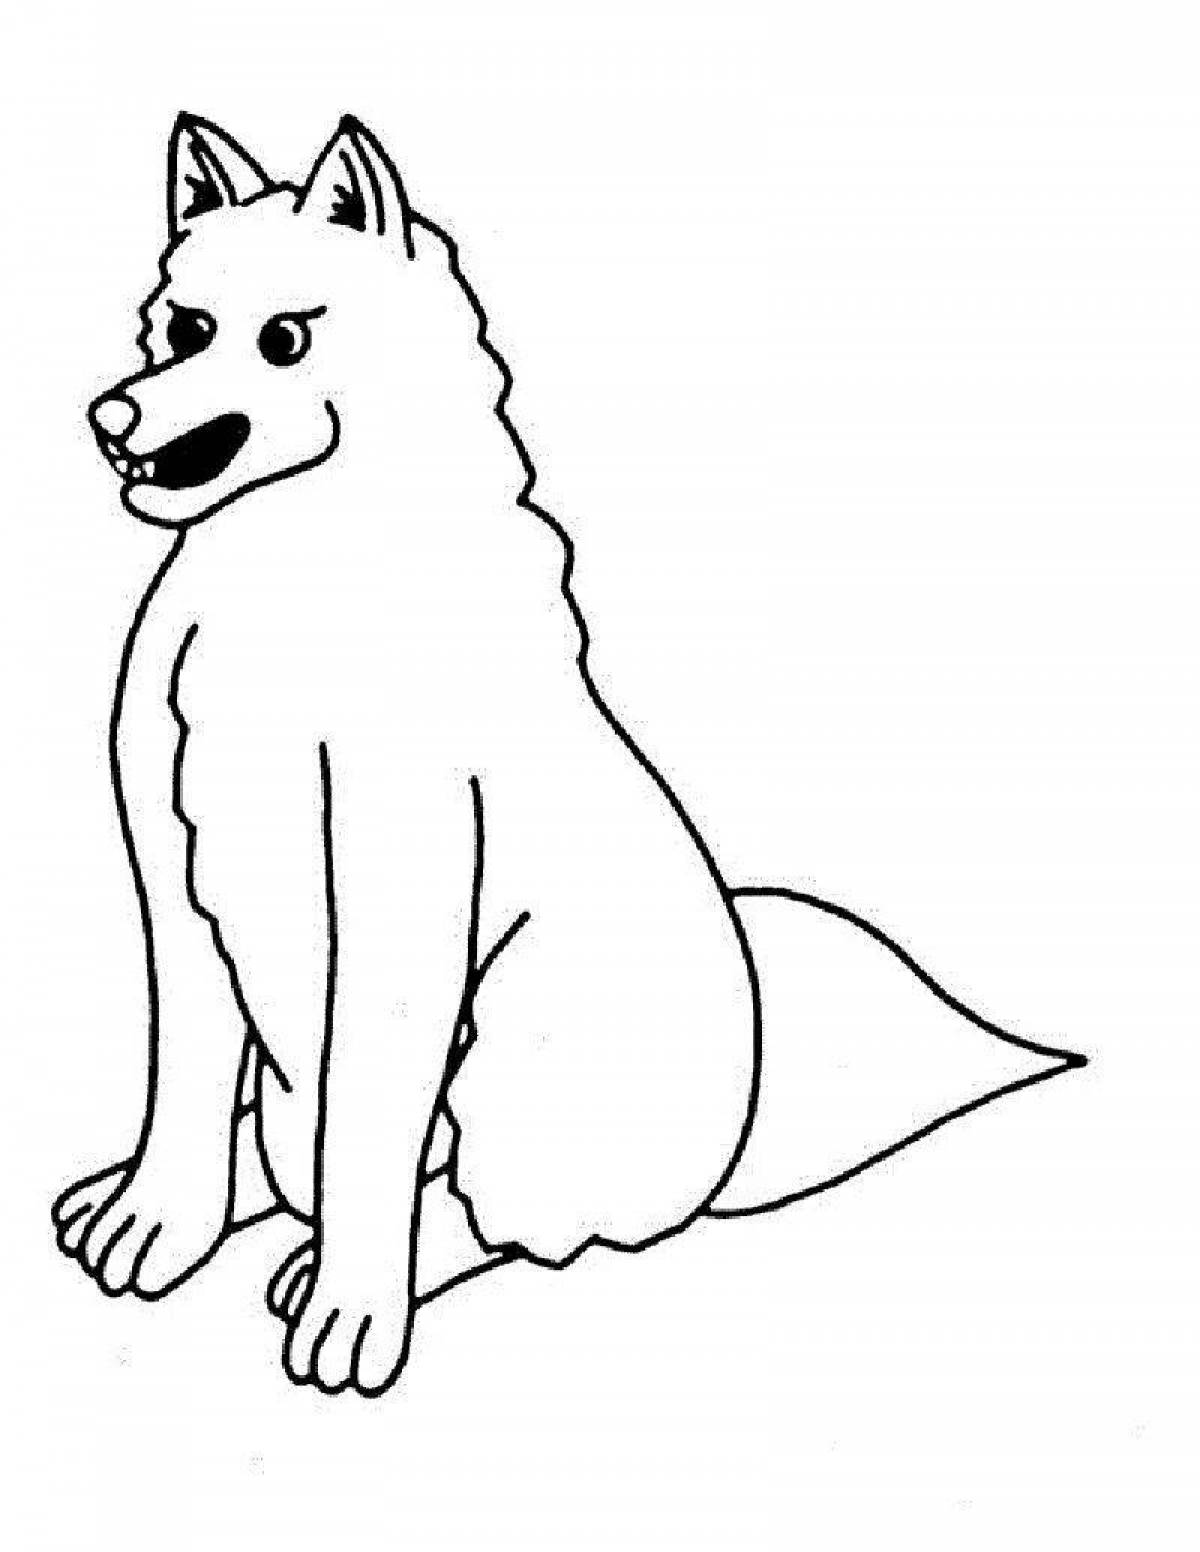 Naughty coyote coloring page